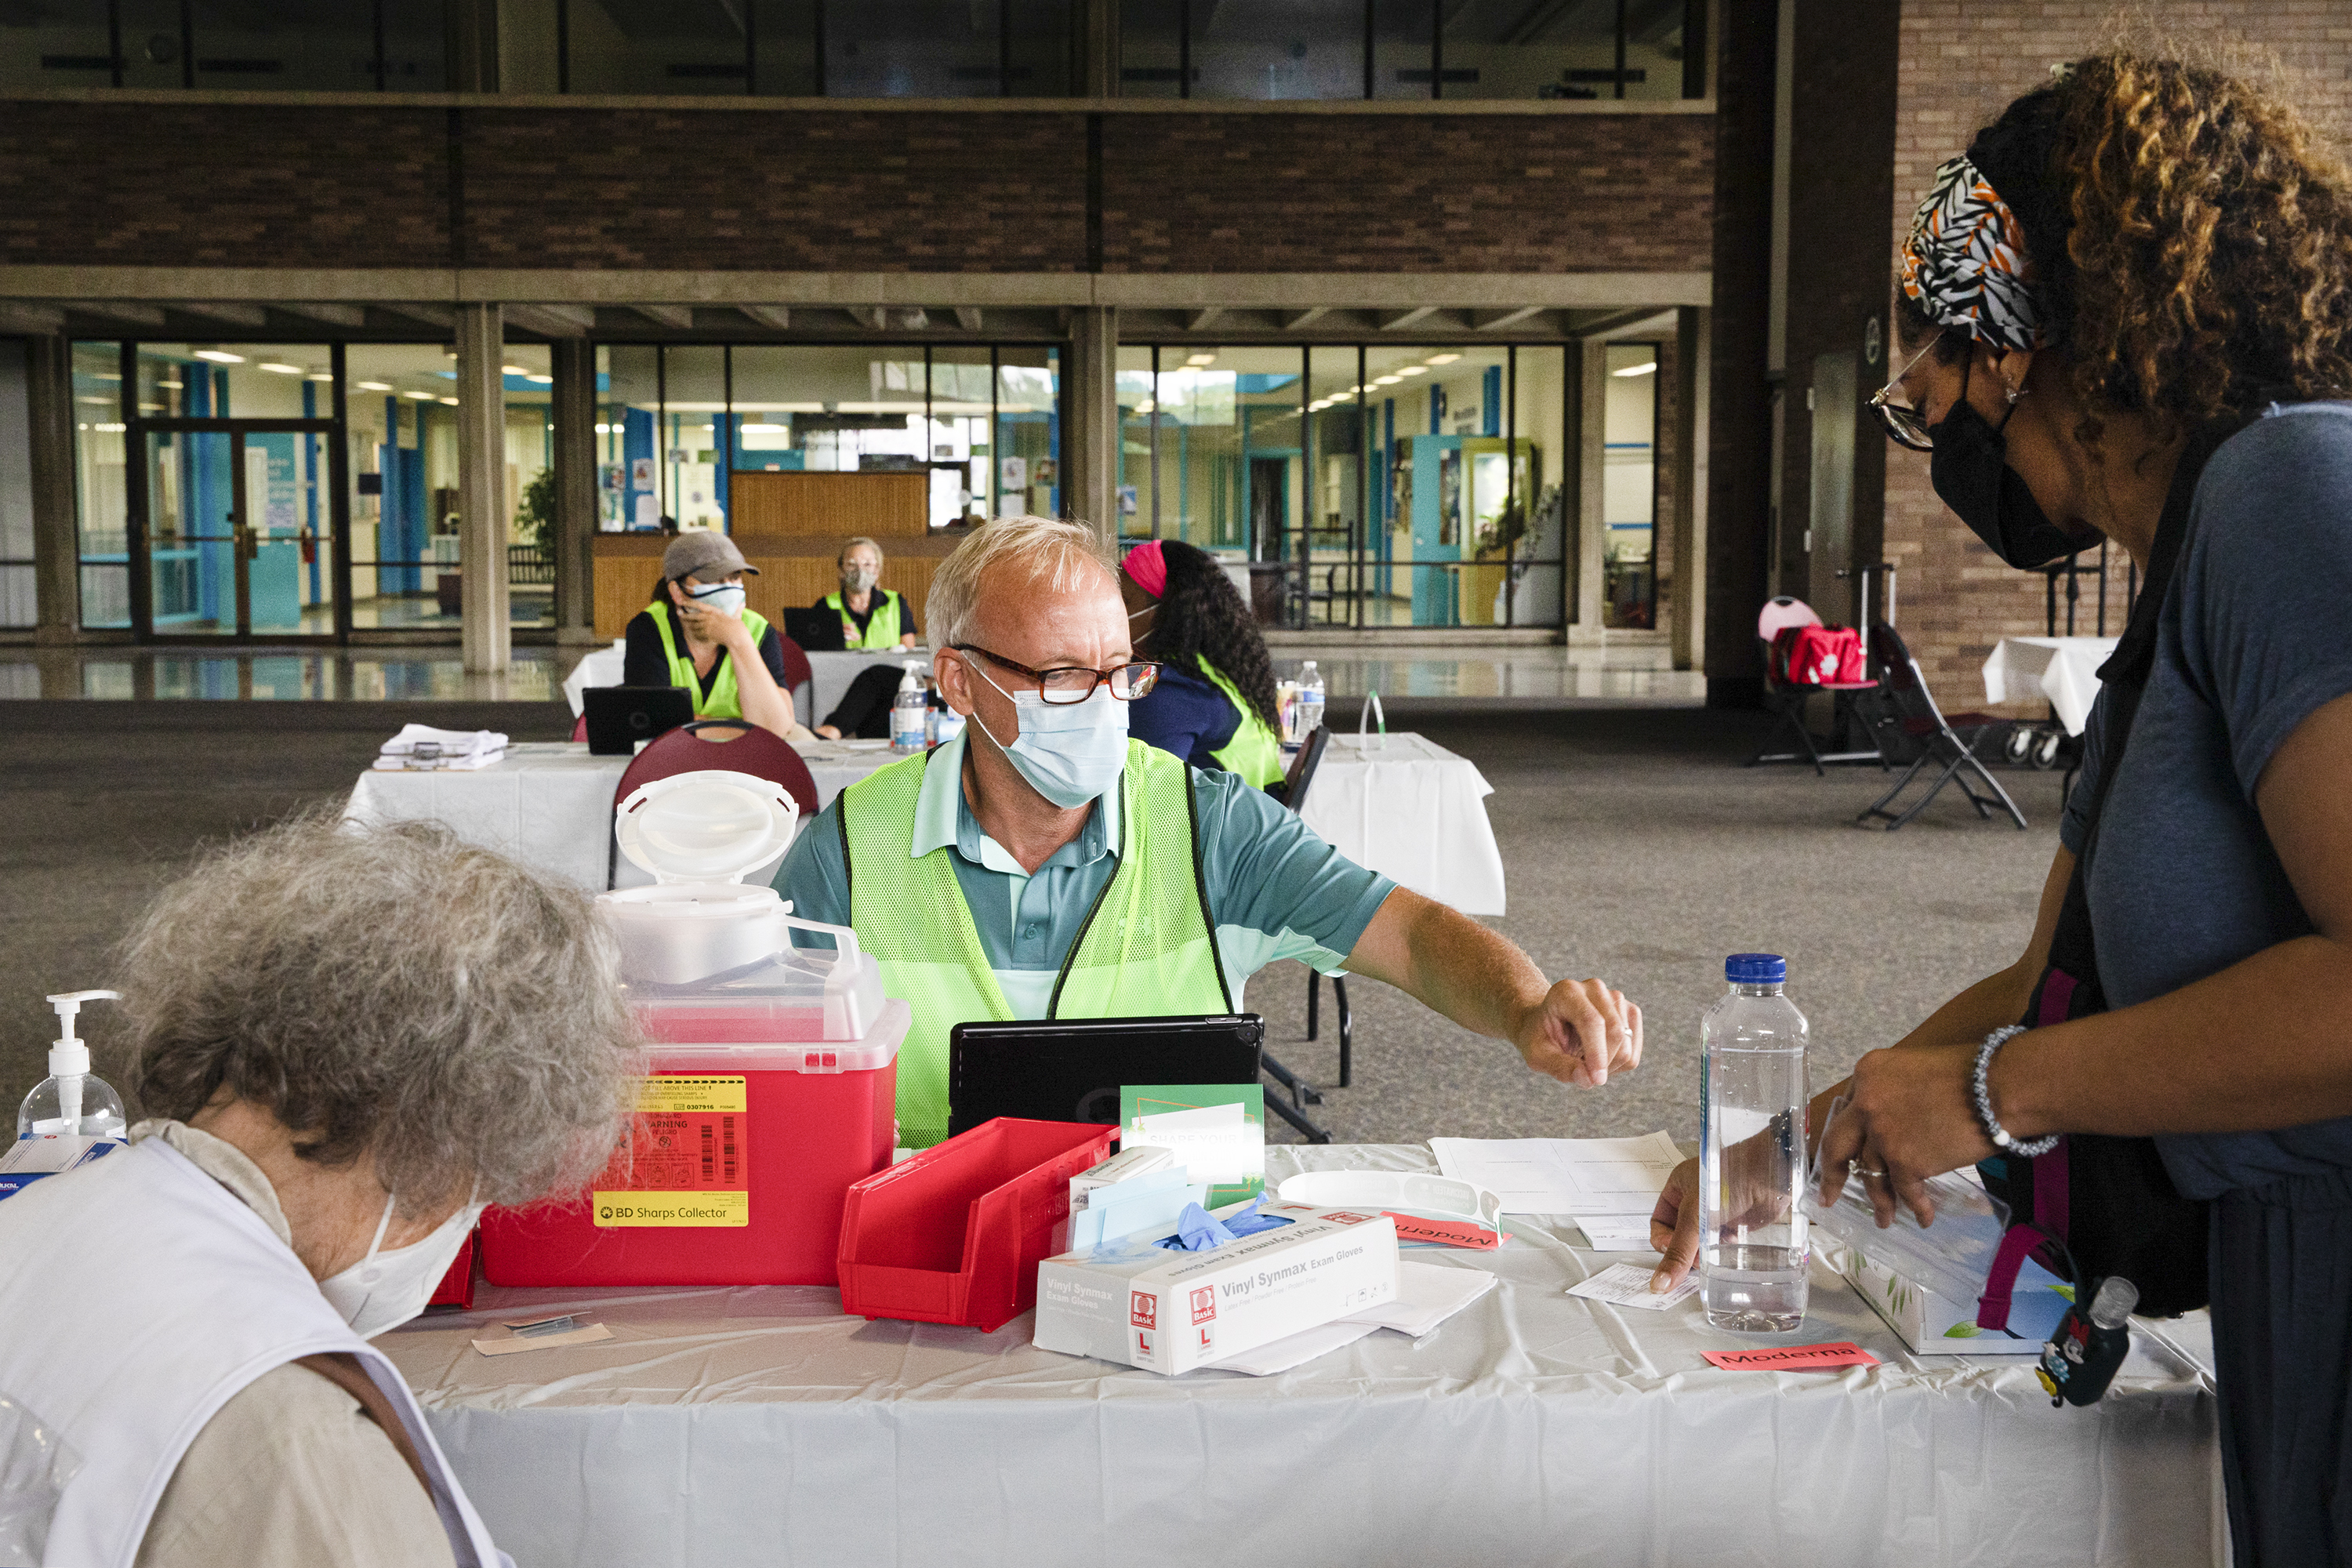 A patient shows their vaccination card to a person sitting at an outdoor table distributing vaccine shots.